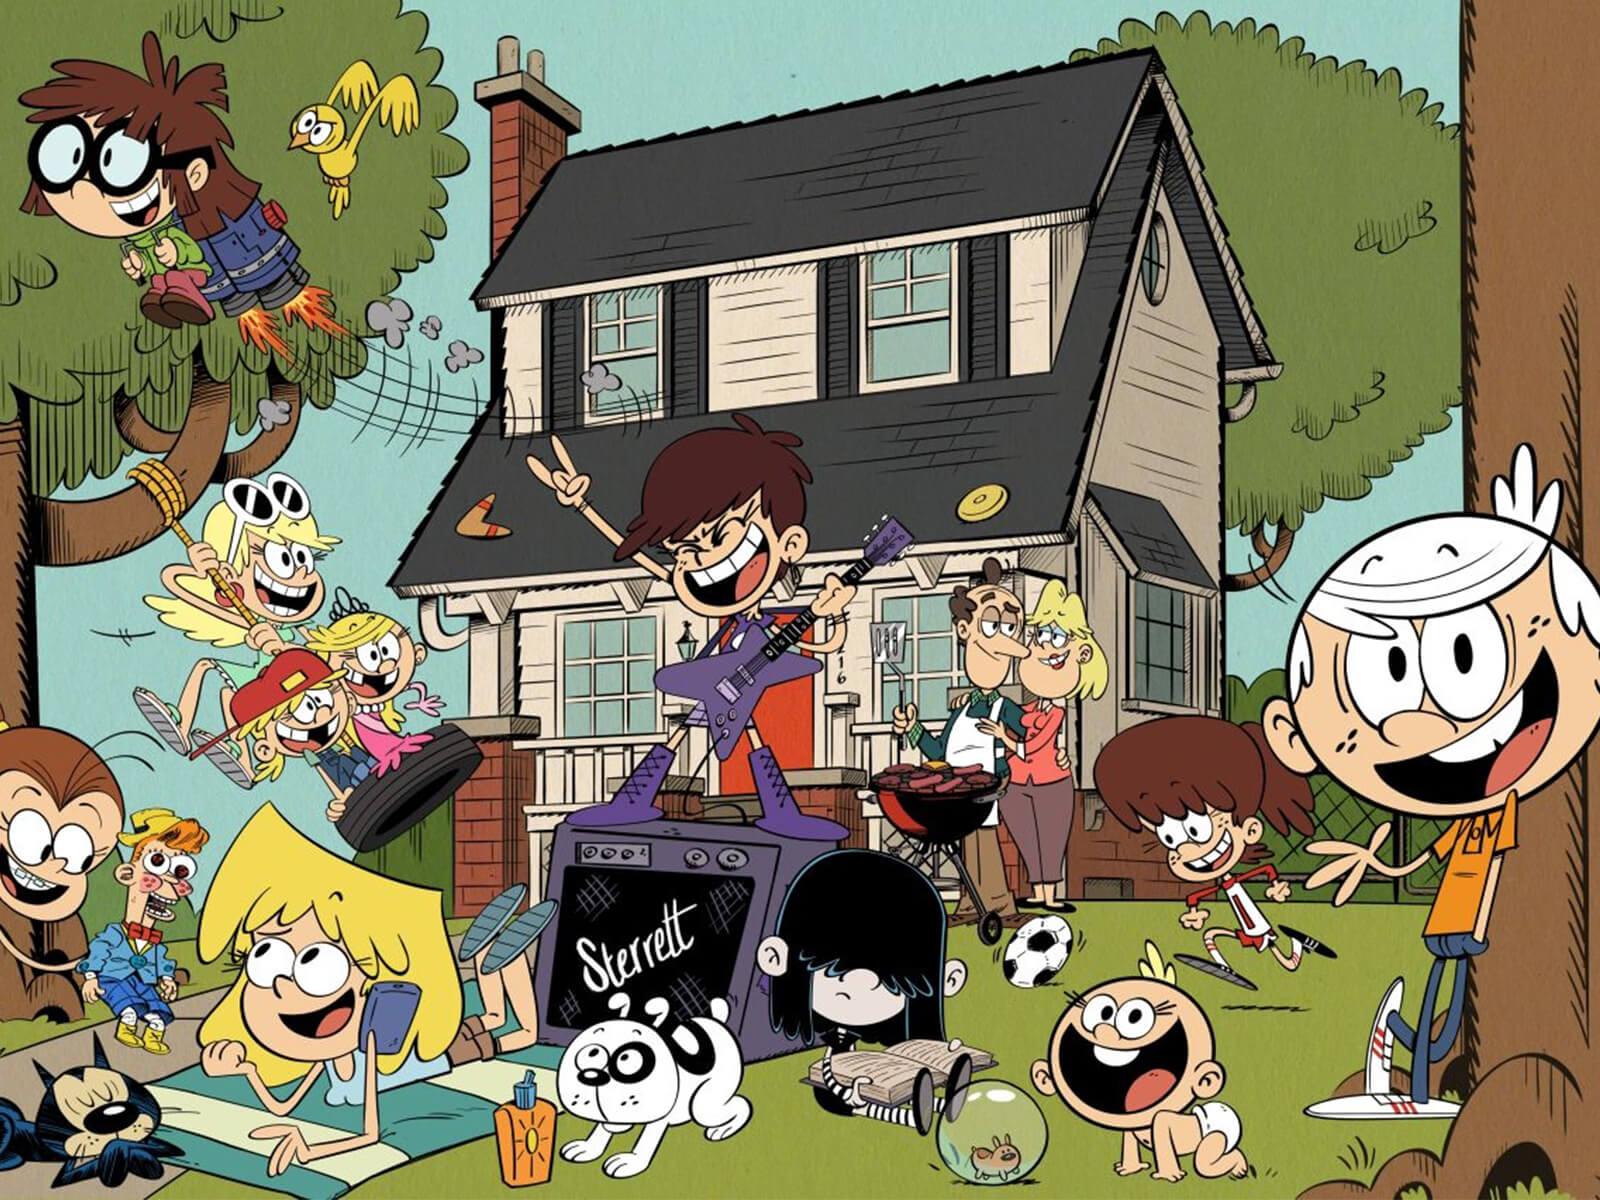 A drawing from Nickelodeon’s The Loud House depicting the chaotic Loud family on their front yard.